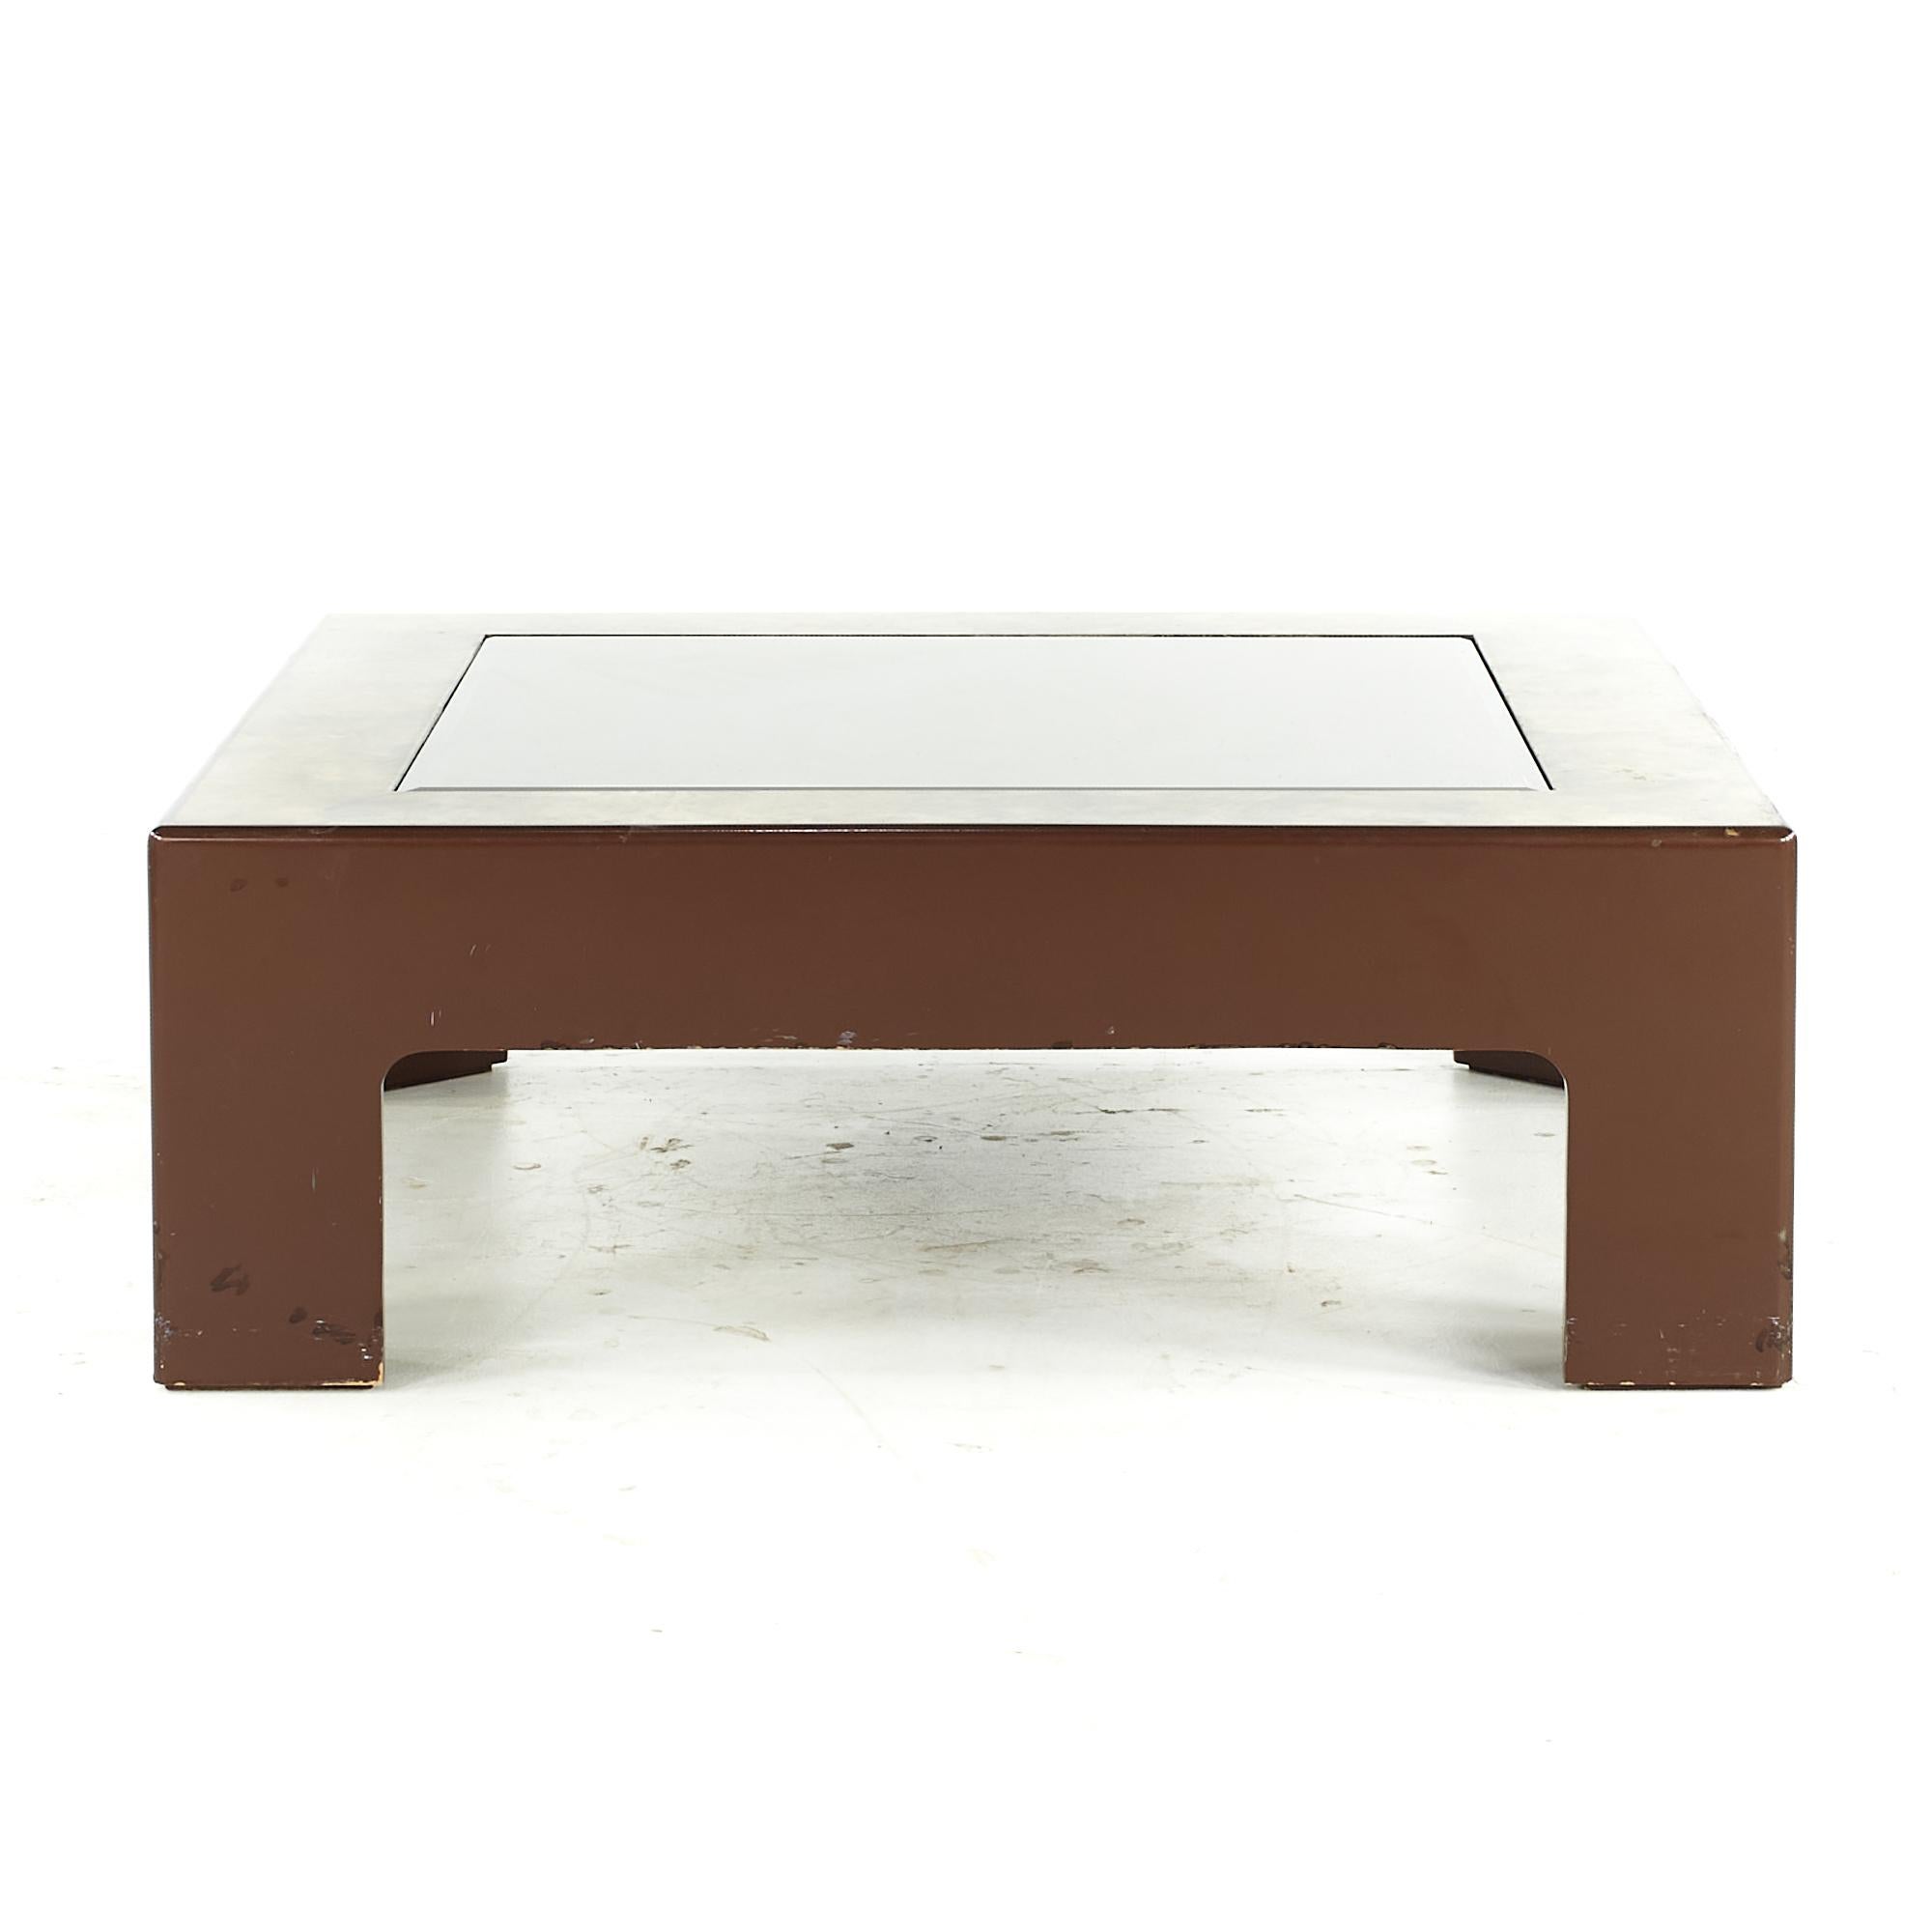 Midcentury Laminate Burlwood and Glass Coffee Table

This coffee table measures: 44 wide x 44 deep x 15.25 inches high

All pieces of furniture can be had in what we call restored vintage condition. That means the piece is restored upon purchase